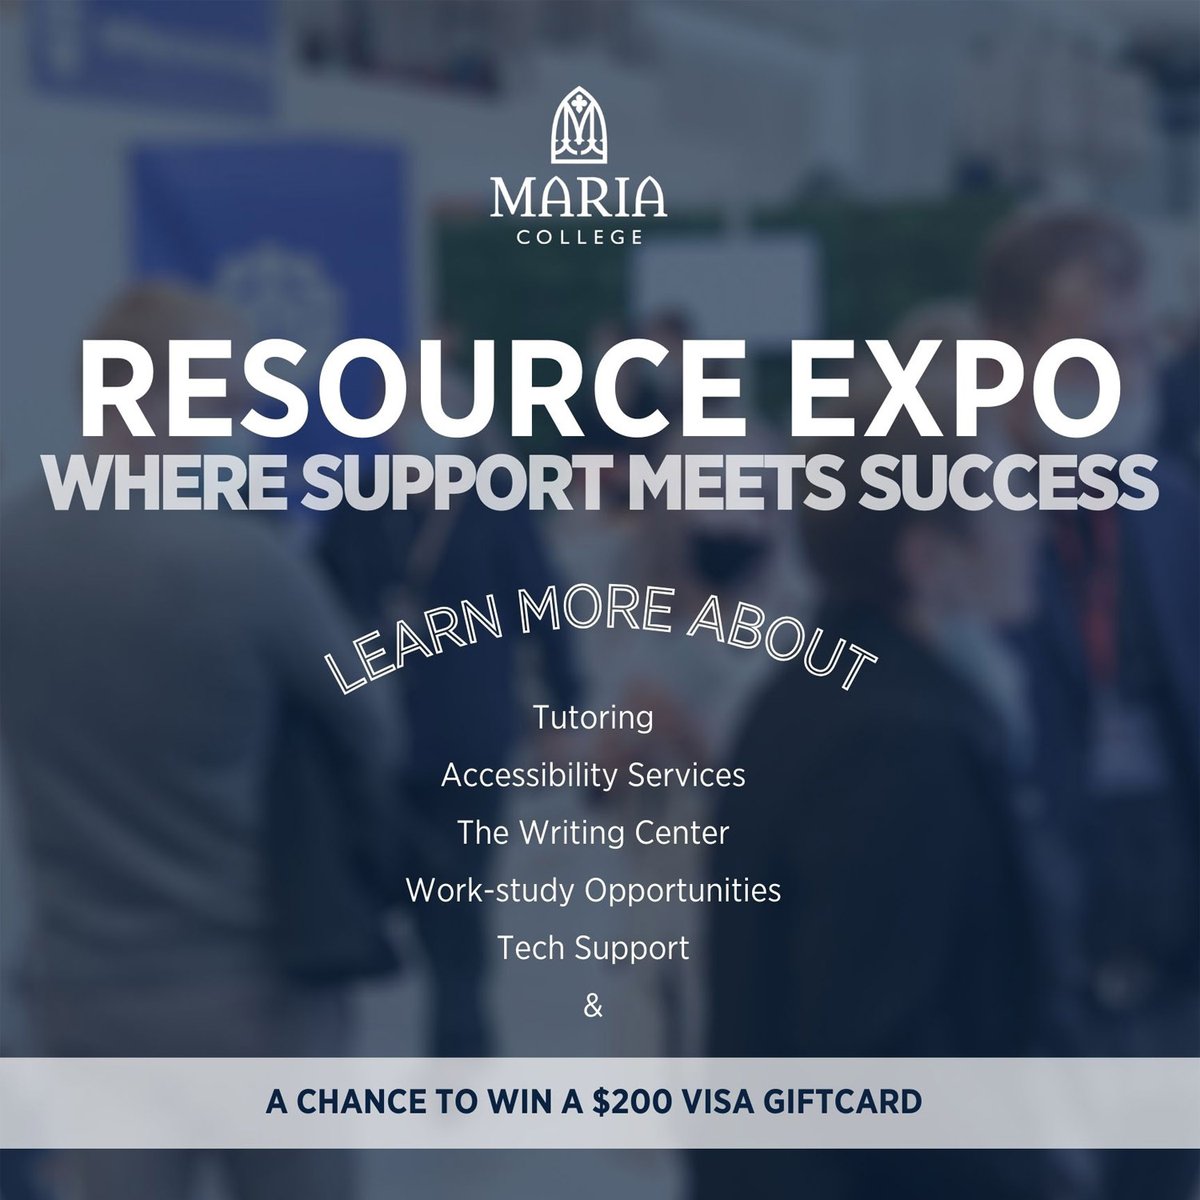 Enrolled Maria students, Resource Expo happening today (1/17) 11:30-1PM & tomorrow (1/18) 4-5:30 in Main Bldg, Lower Level to get info on tutoring, tech support, work-study, & more. If you tag us in a selfie at the event, you'll be entered to win a $200 Visa Giftcard!